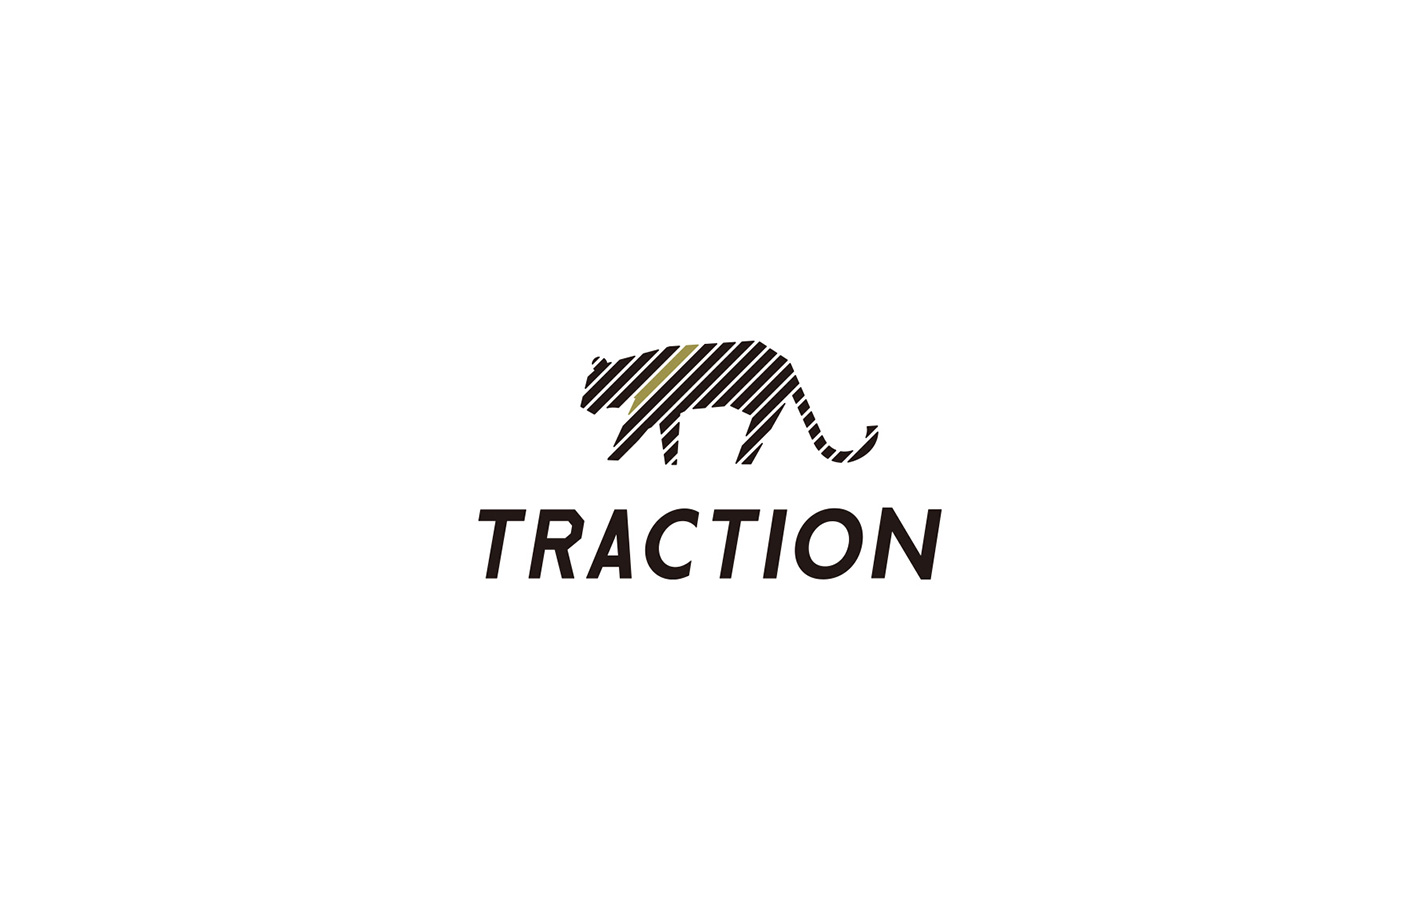 /traction